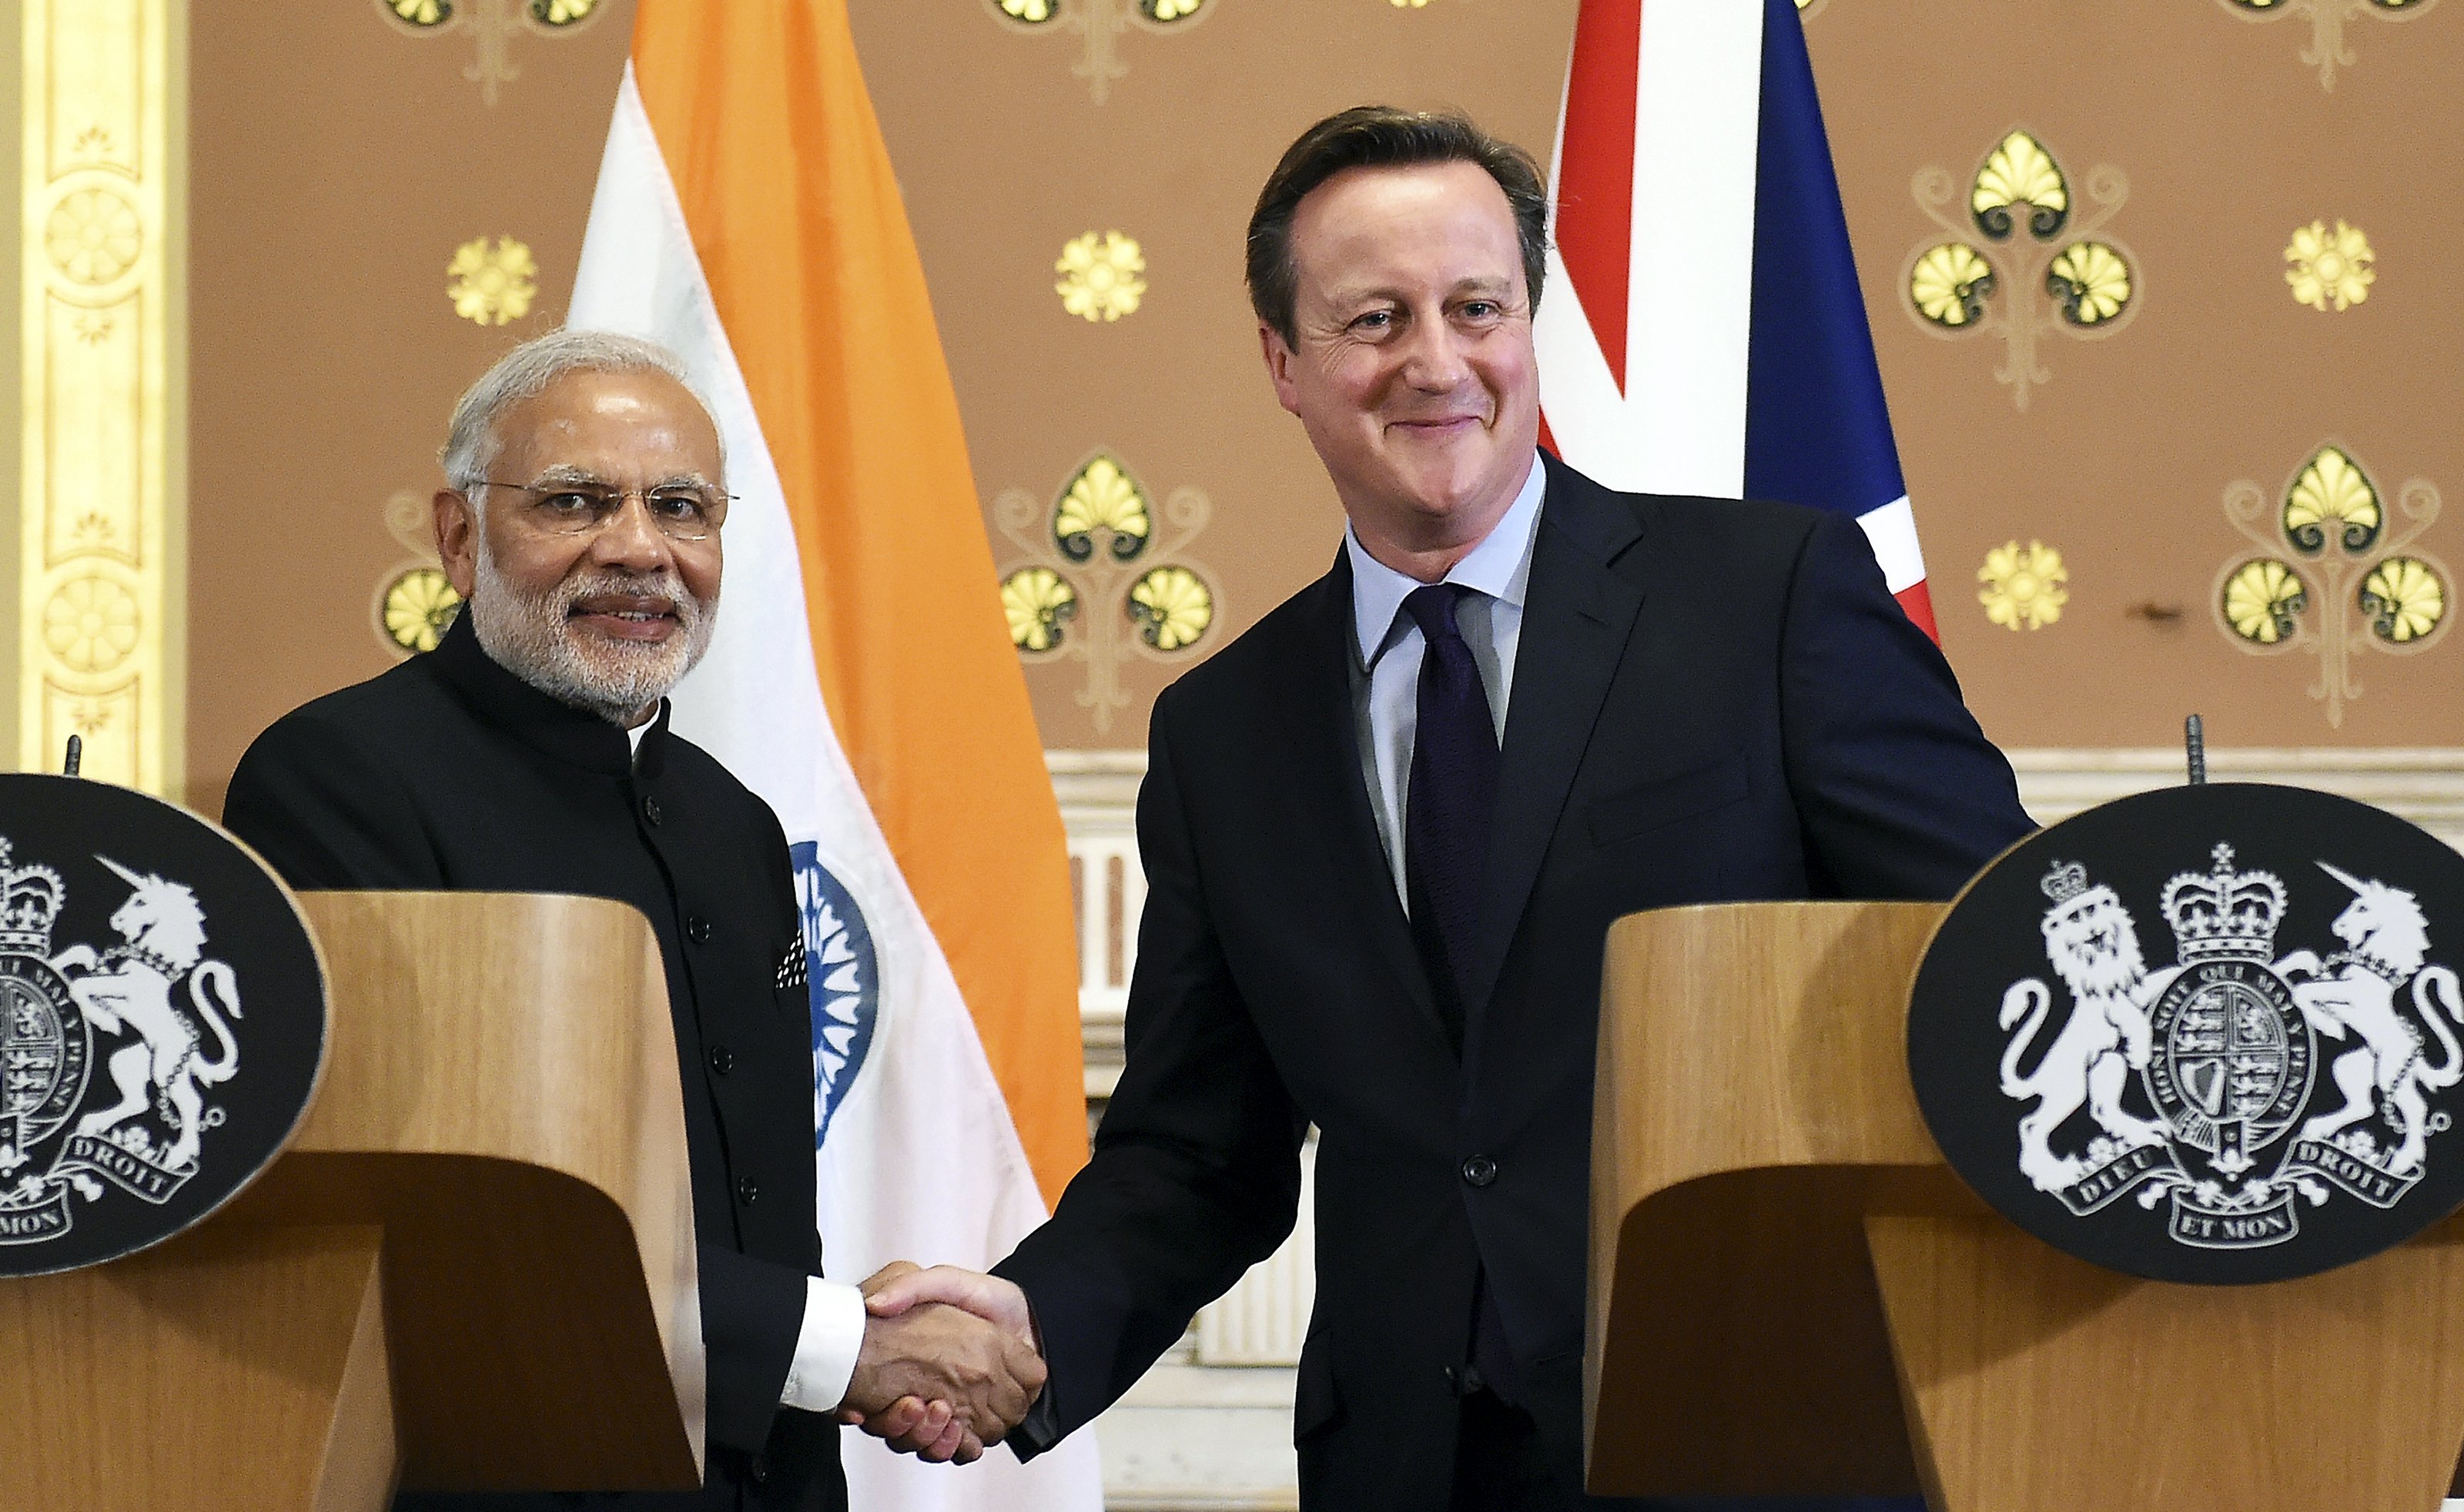 India's Prime Minister Narendra Modi (left) shakes hands with Britain's Prime Minister David Cameron after a joint news conference at the Foreign Office at the start of a three-day official visit in London November 12, 2015. Photo: Reuters